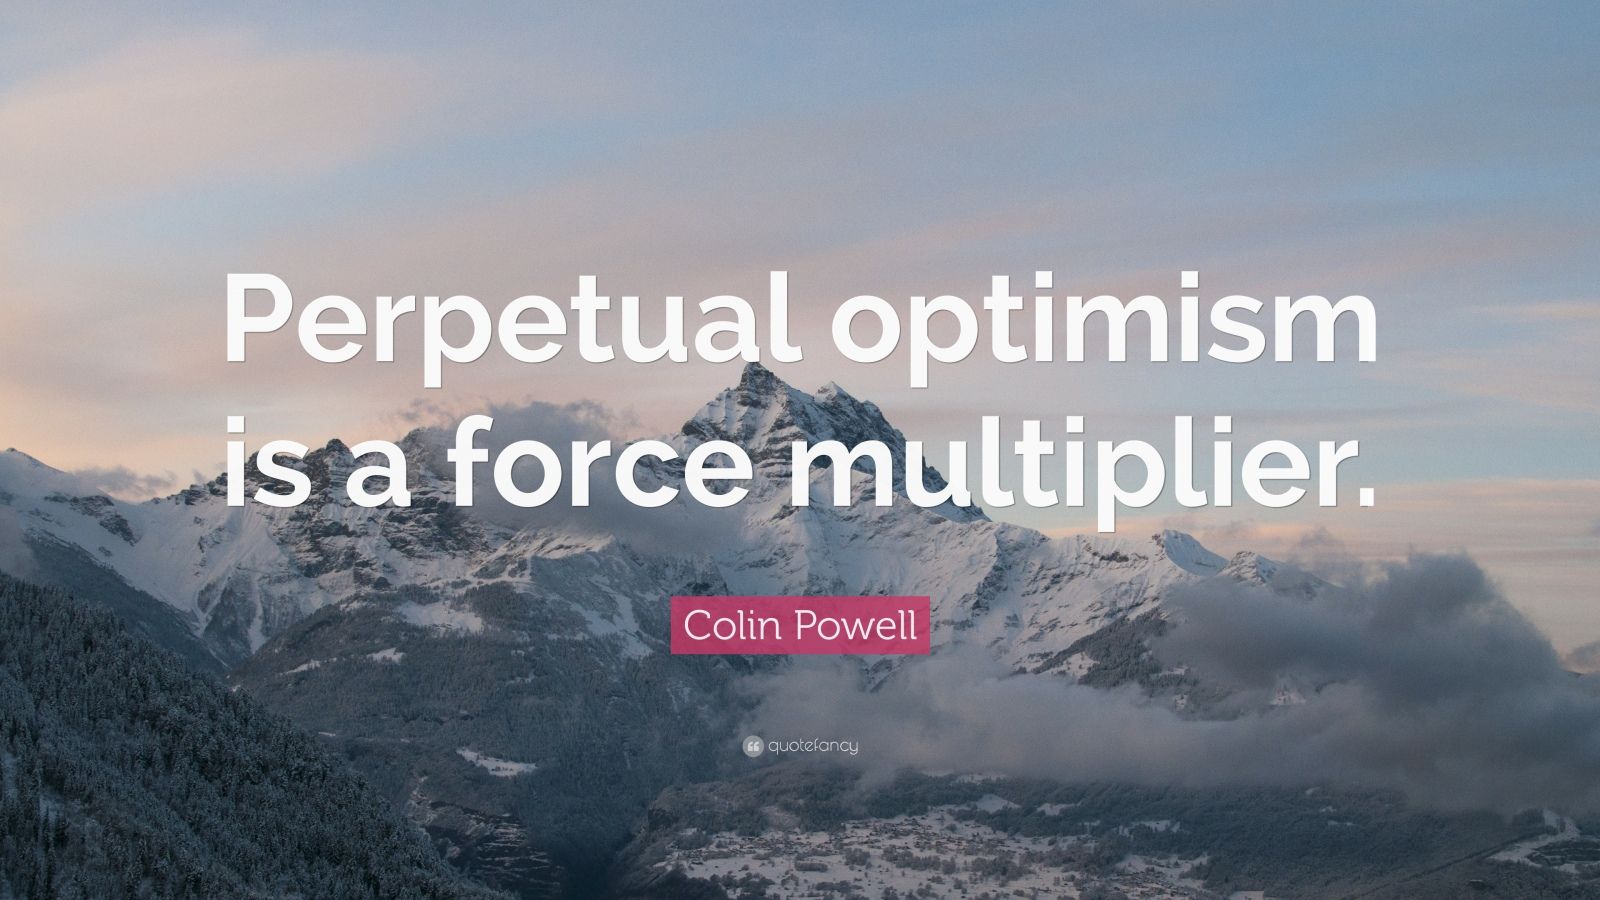 perpetual optimism meaning in hindi